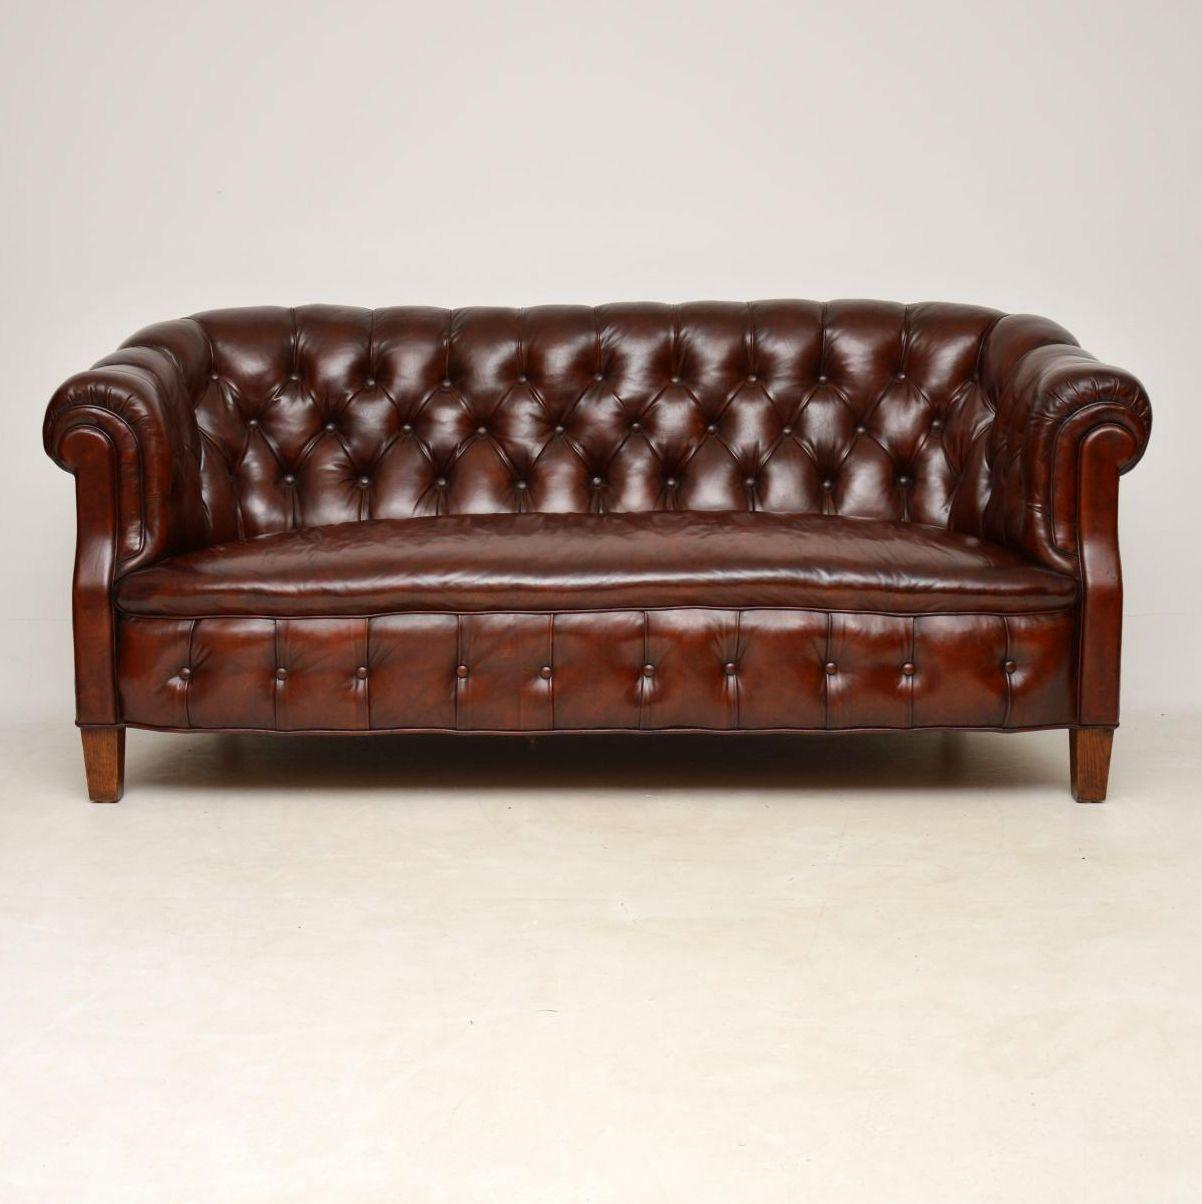 This antique Swedish deep buttoned leather Chesterfield sofa has very generous proportions & is very comfortable. The leather is all original & in good condition. It’s not like the normal English traditional chesterfields, because the back is